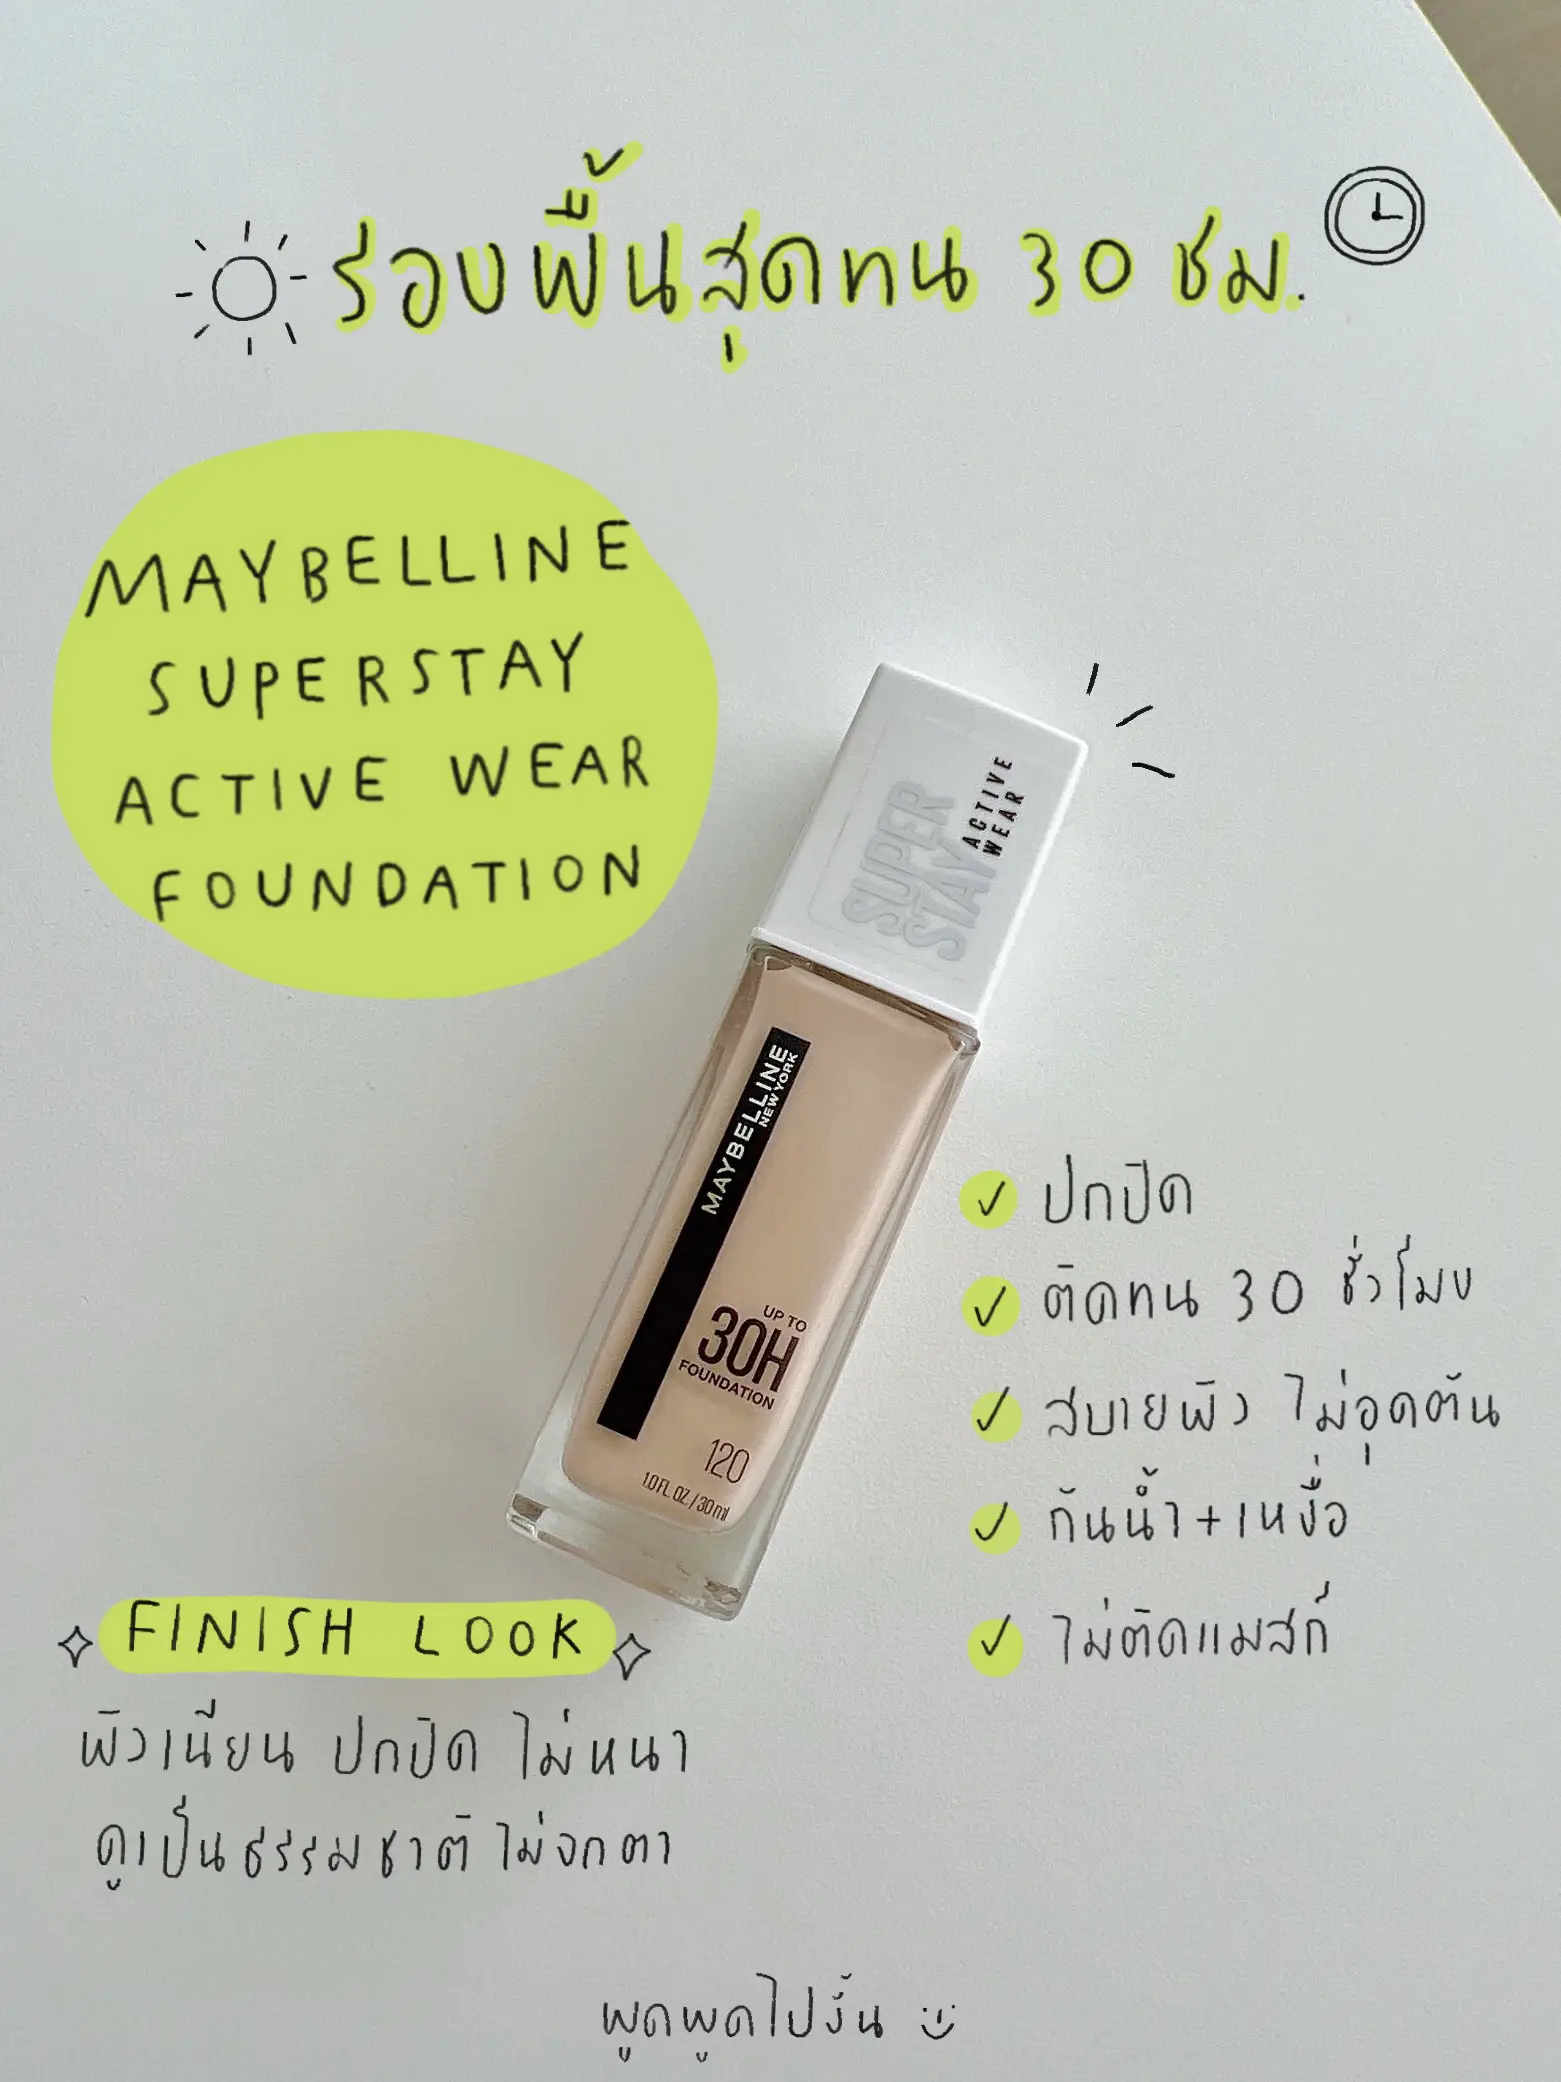 Gallery Foundation. | 30 posted Last New | to Maybelline by Lemon8 hours. ployhomx up